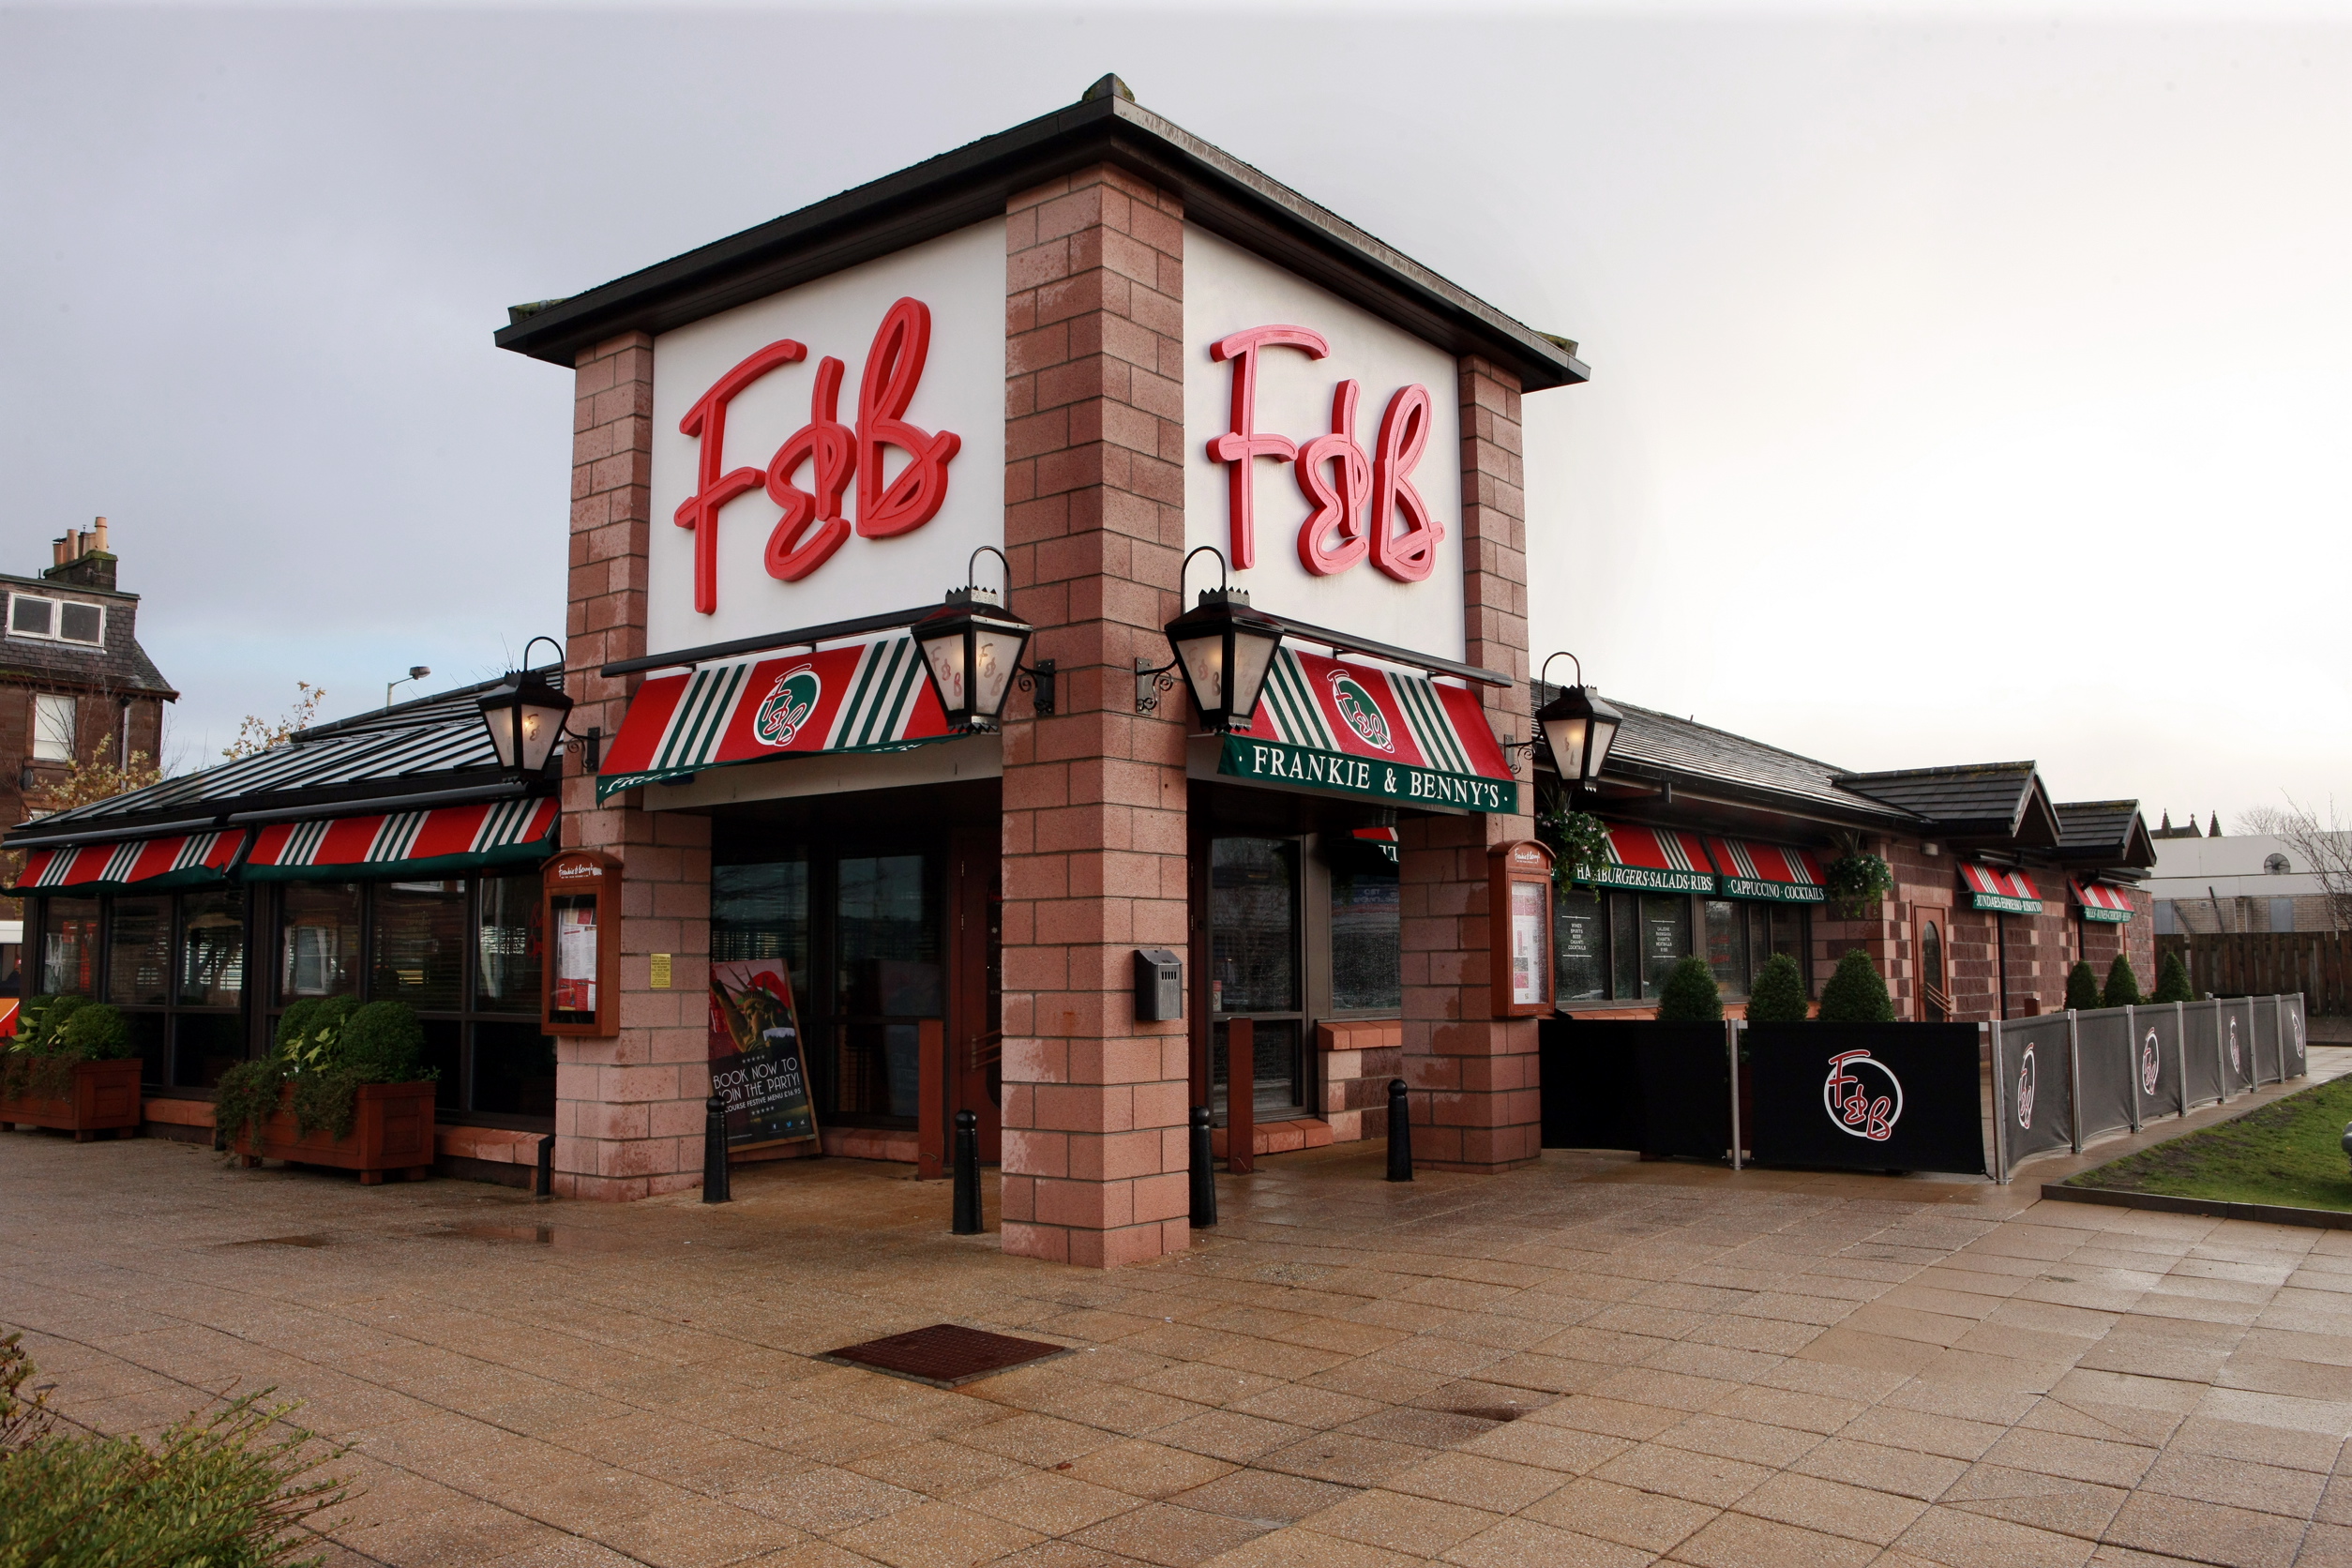 Frankie & Benny's at St Catherine's Retail Park in Perth.